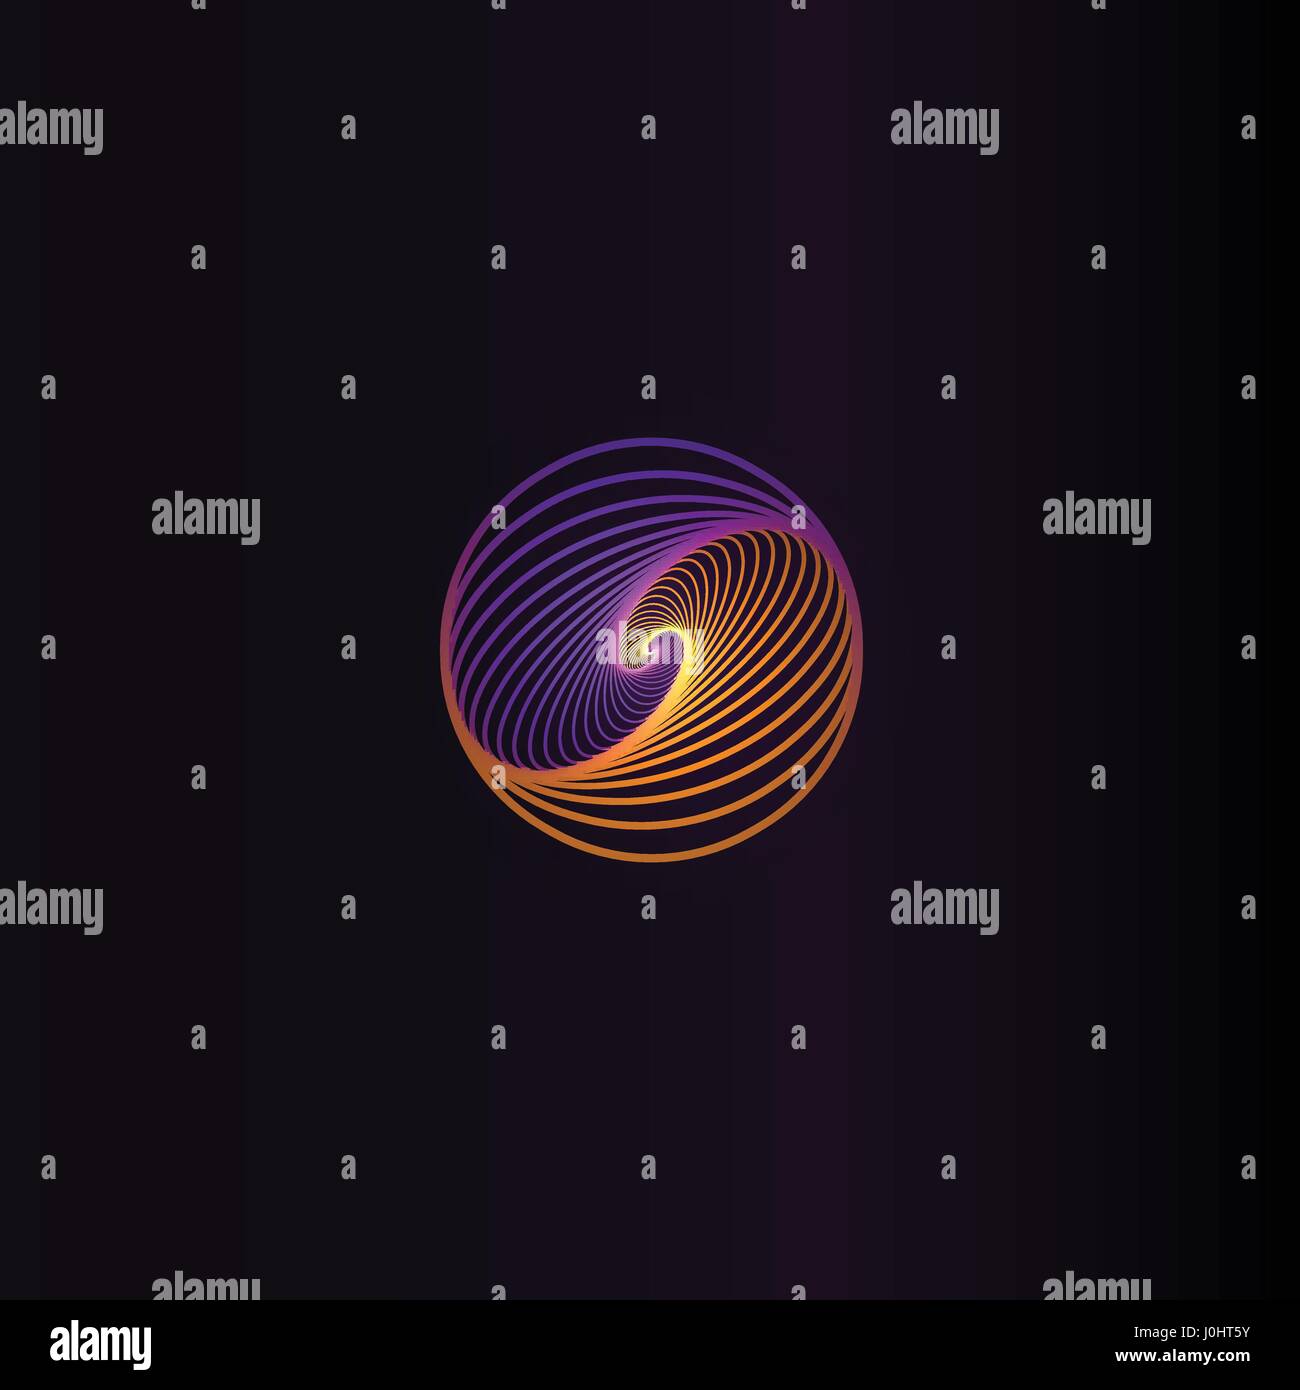 Isolated abstract colorful round shape logo, space element, swirl logotype, planet icon on black background vector illustration Stock Vector